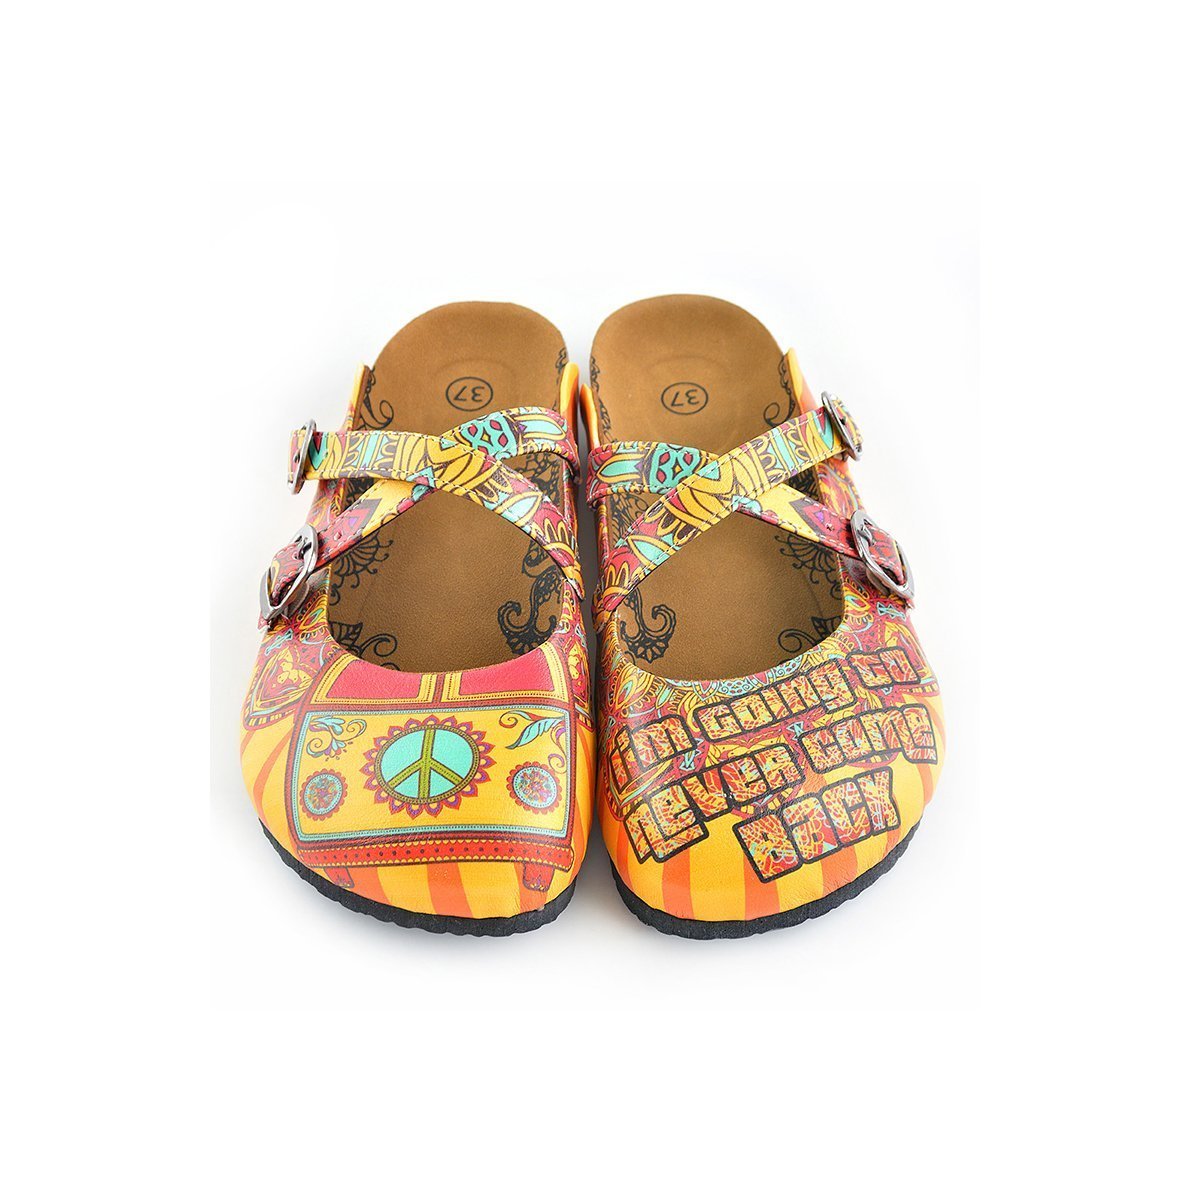 Yellow & Red Peace Sign Cross-Strap Clogs WCAL134 (737672822880)